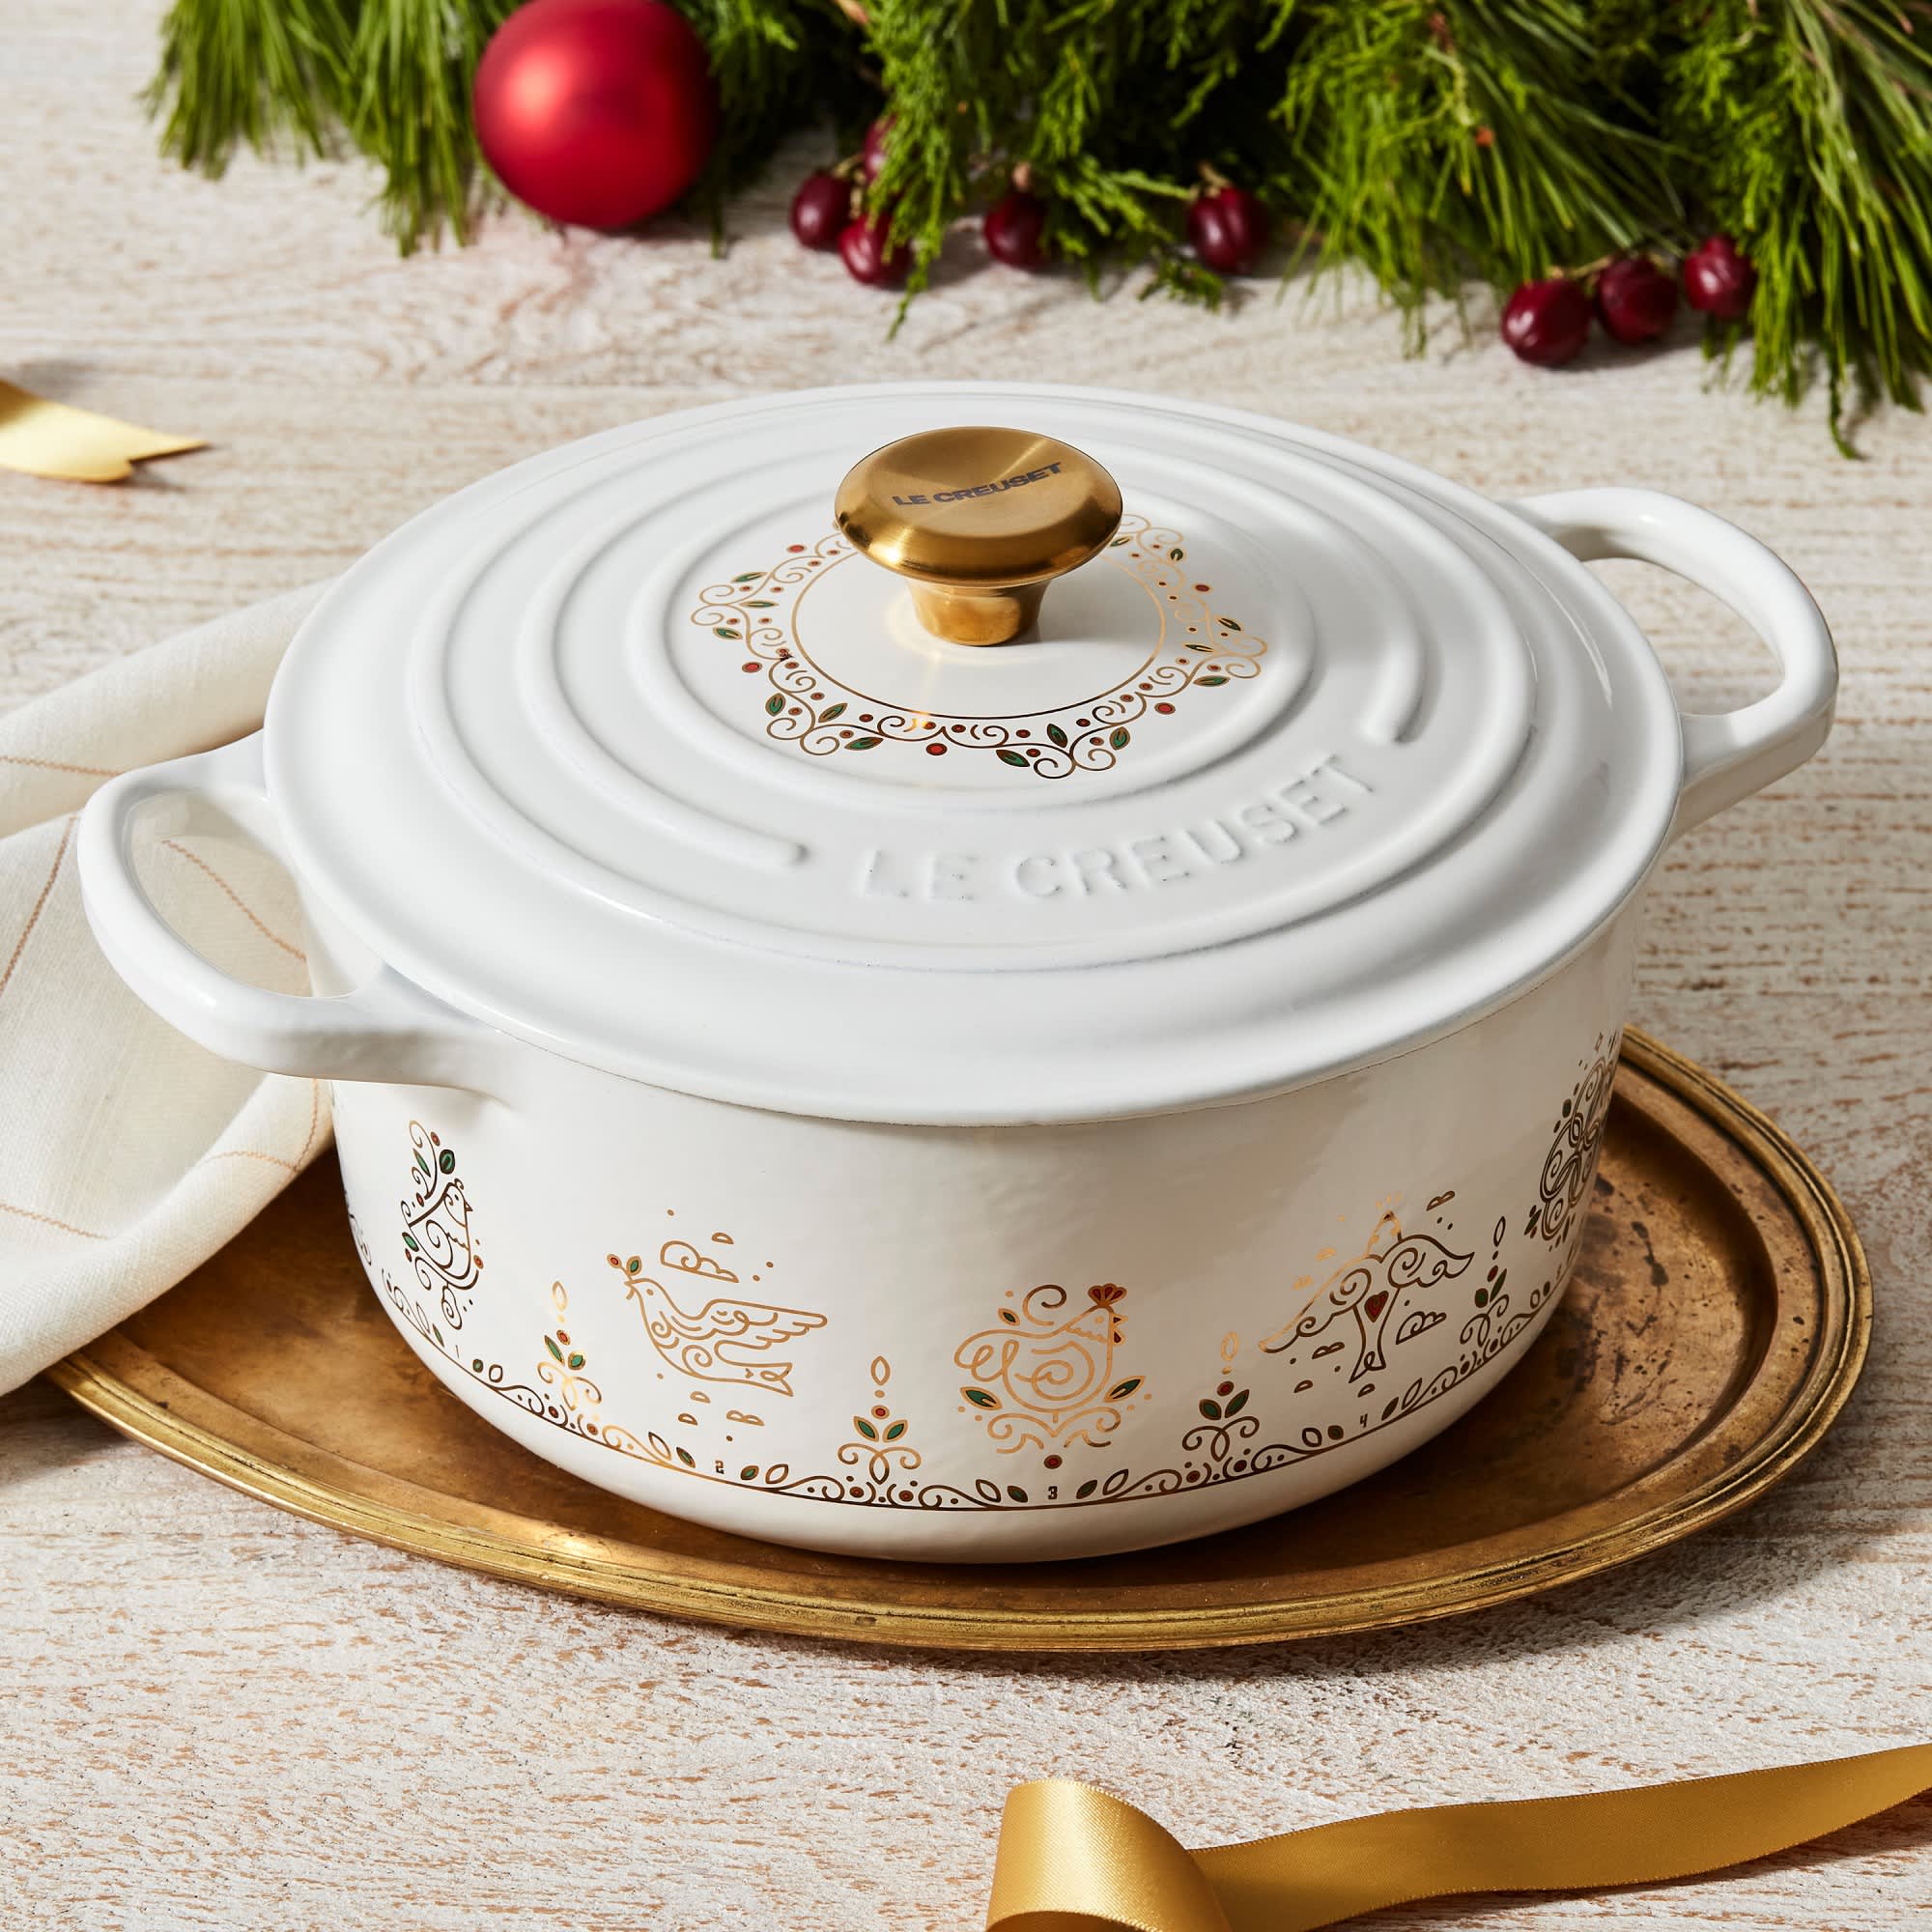 Le Creuset Holiday Sale 2022: Get the Dutch Oven for Over 50% Off